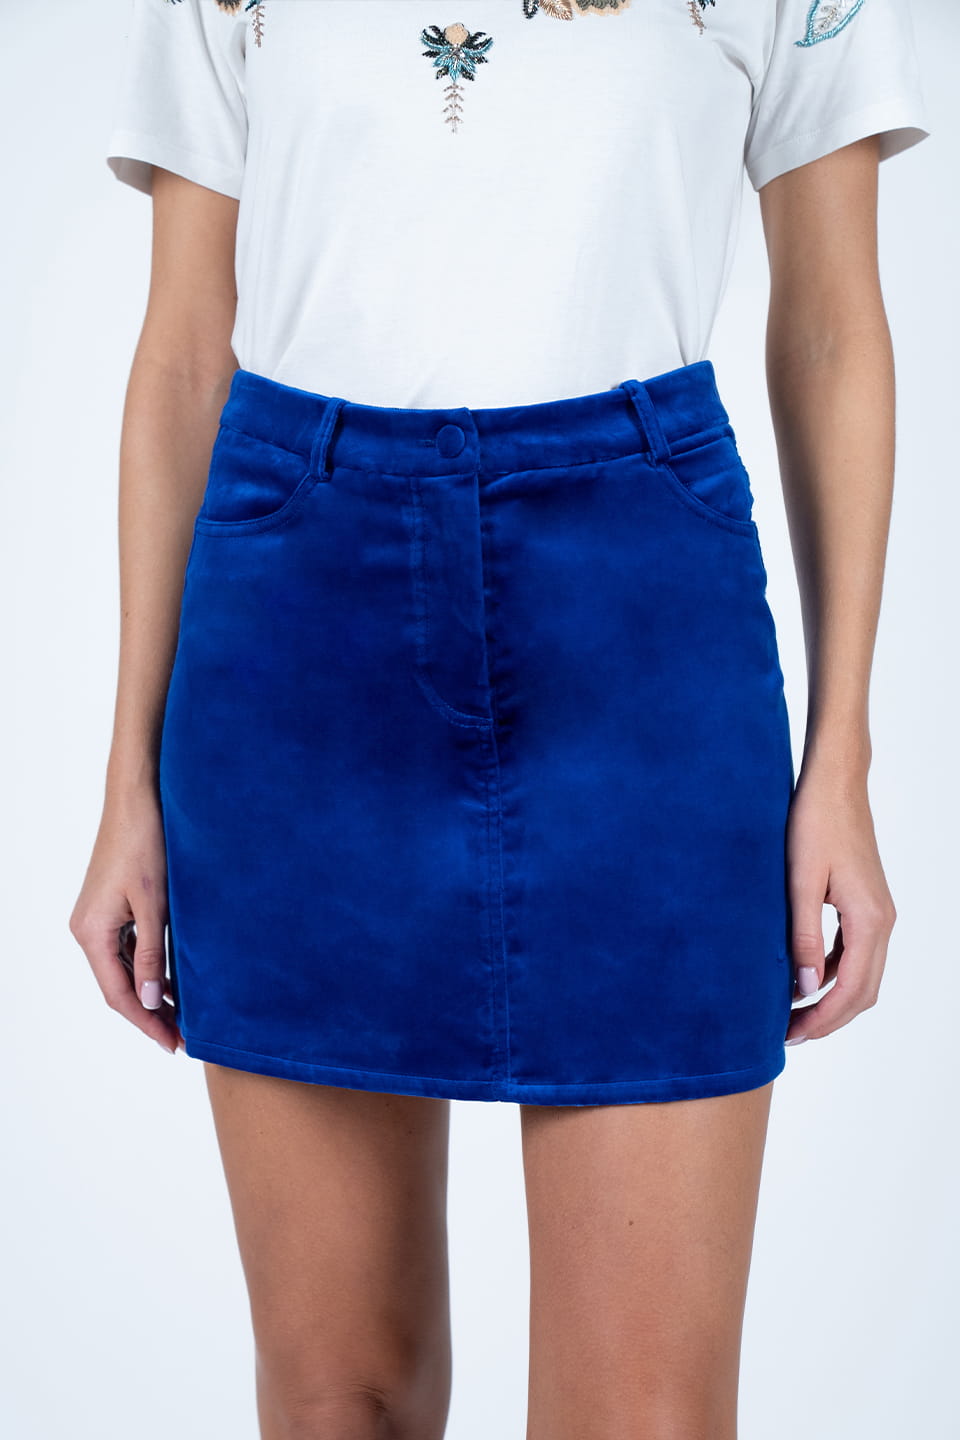 Shop online trendy Blue Skirts from Vivetta Fashion designer. Product gallery 1